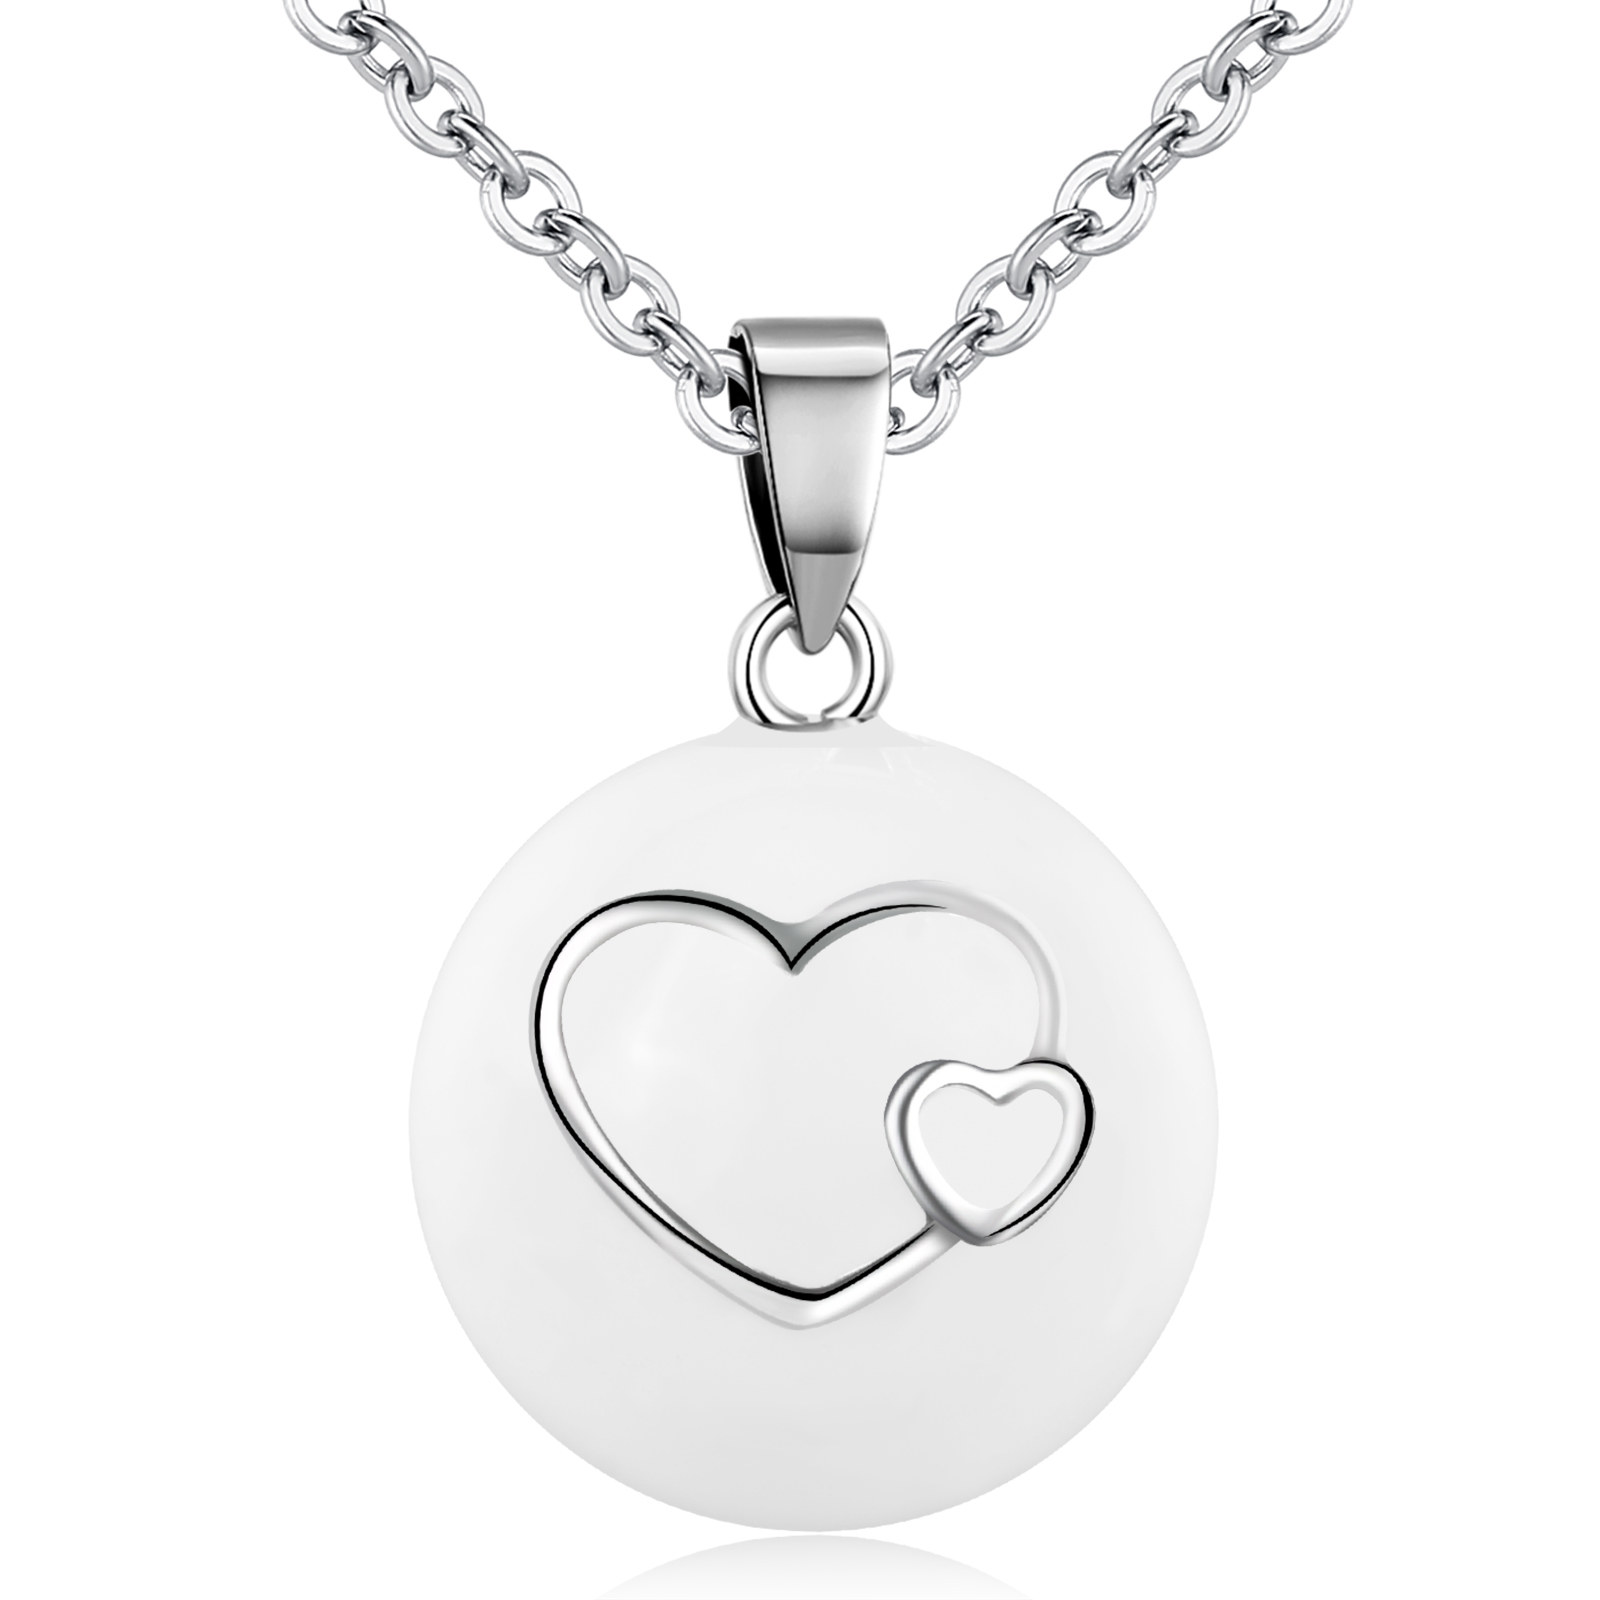 Merryshine Jewelry Heart Pattern White Chiming Ball Angel Caller Sterling Silver Necklace